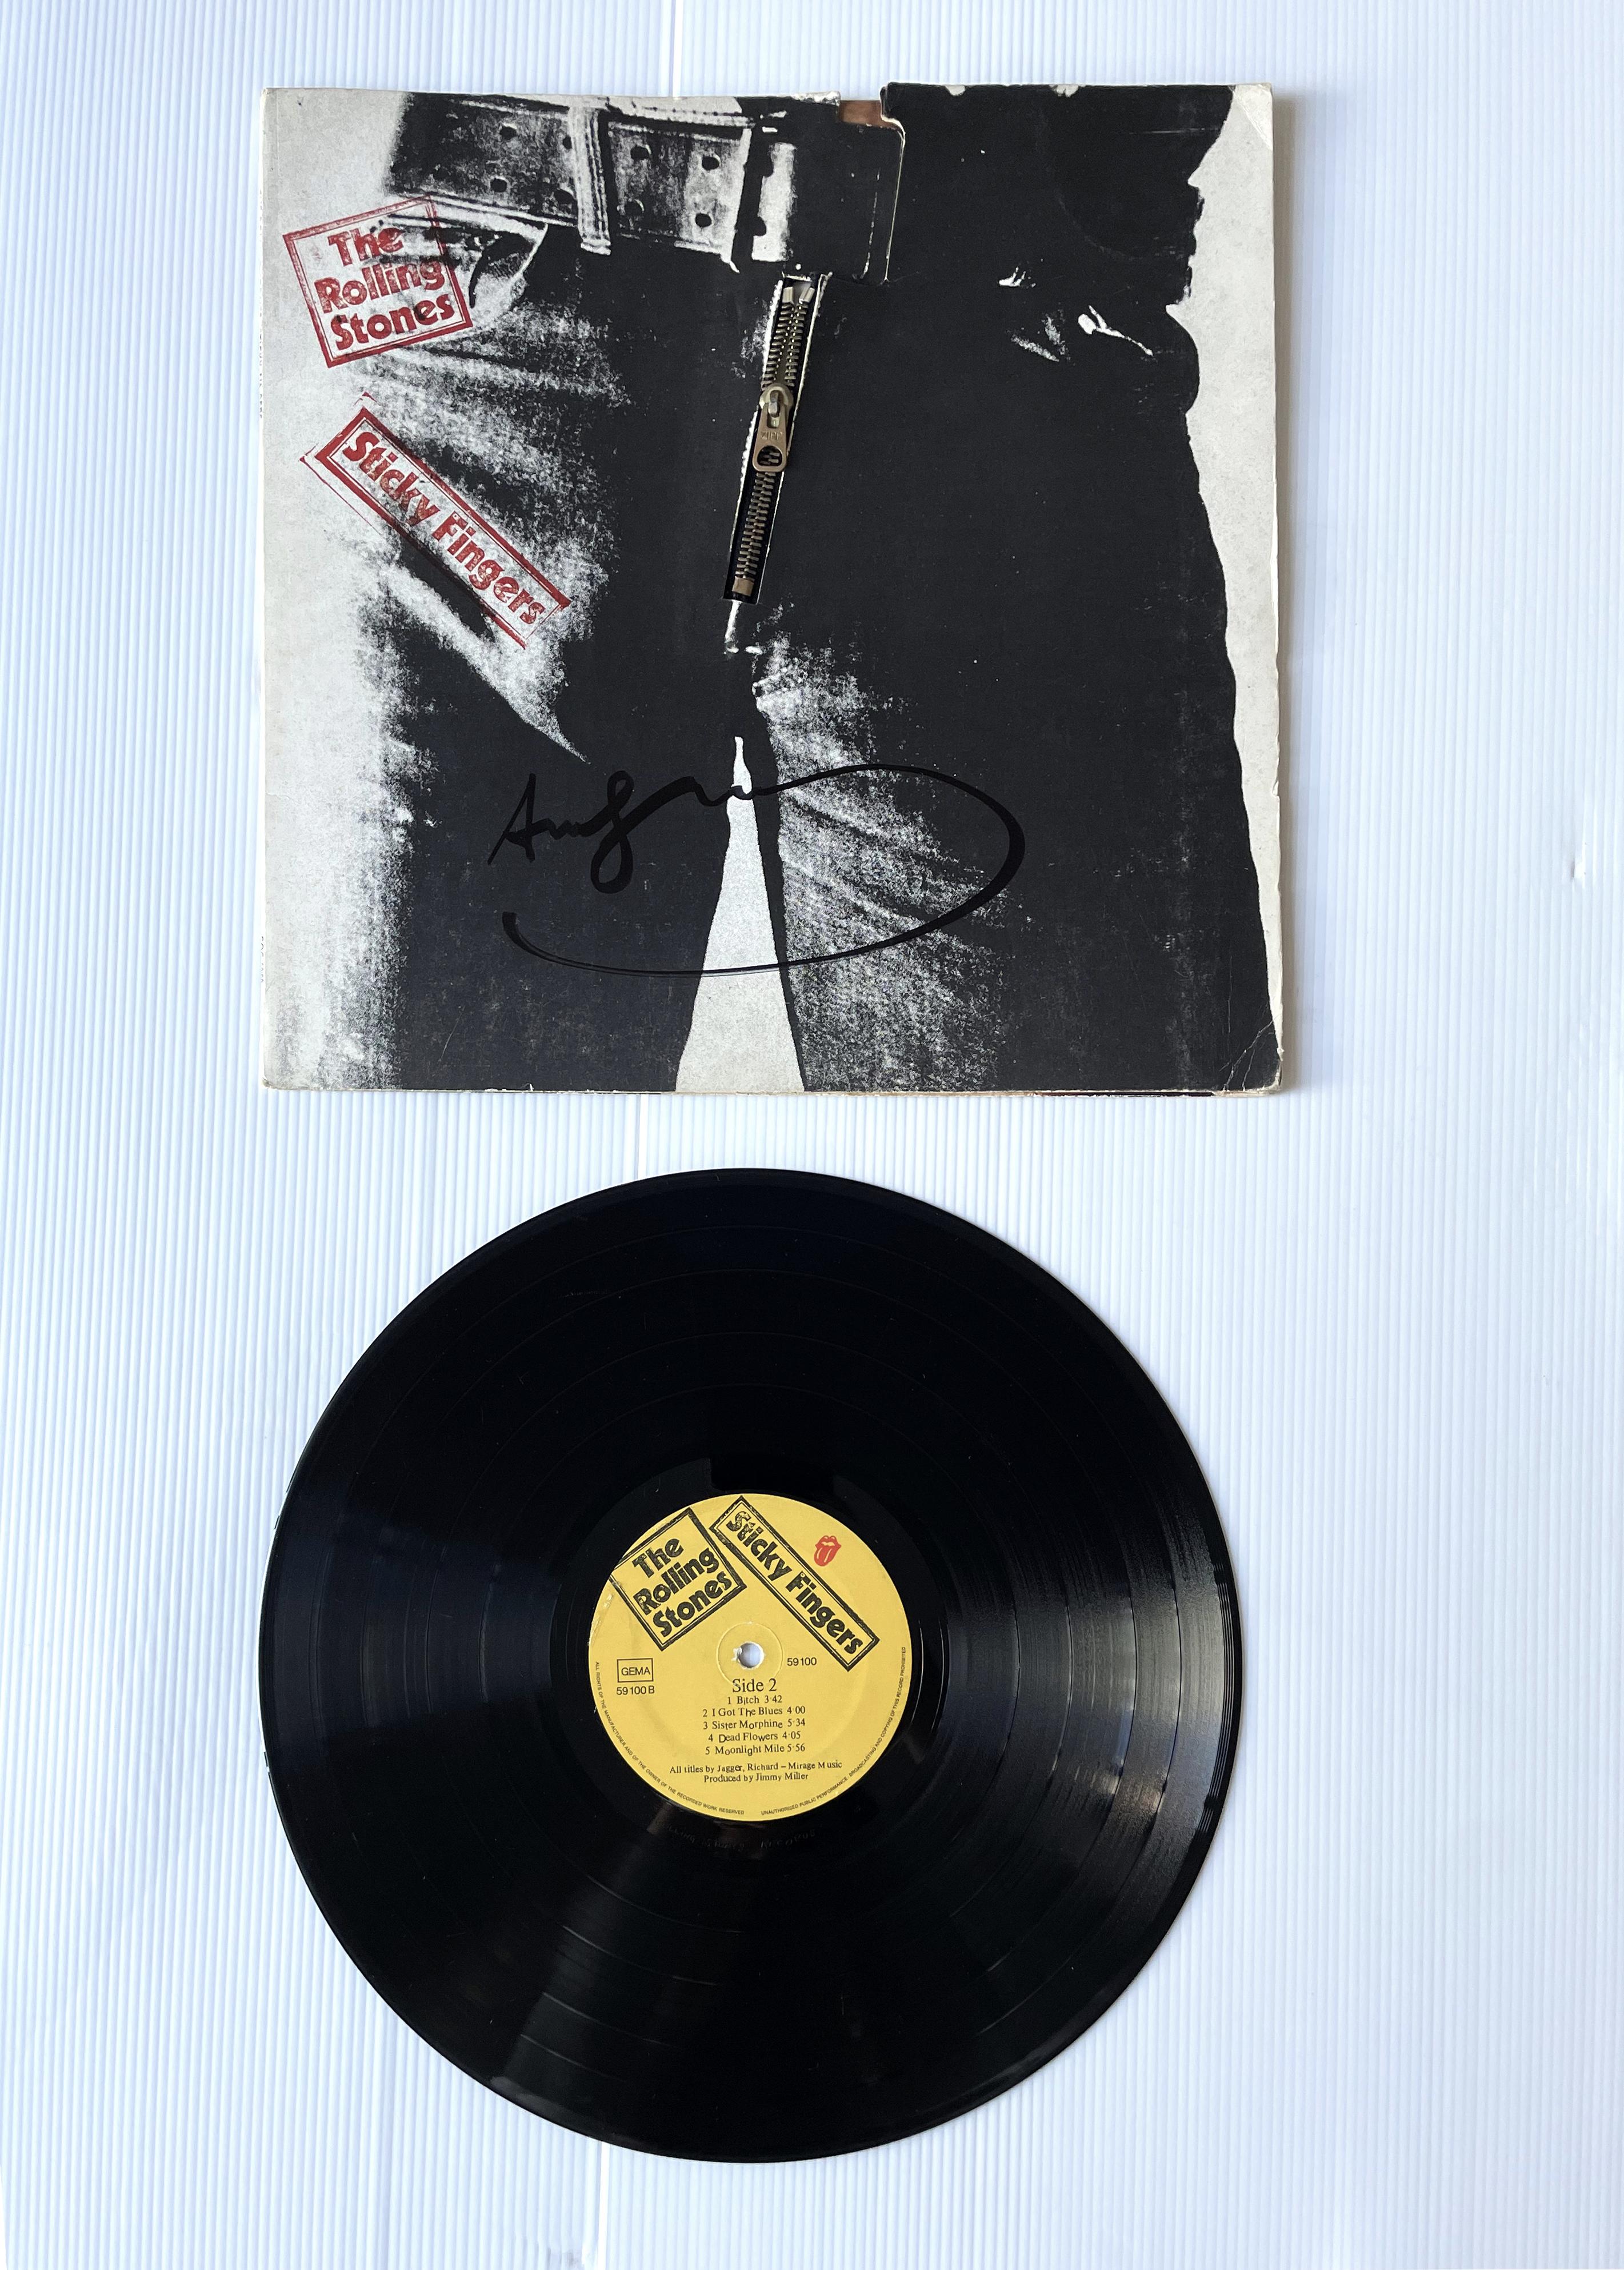 The Rolling Stones, Sticky Fingers, LP, 1971 - Art by Andy Warhol